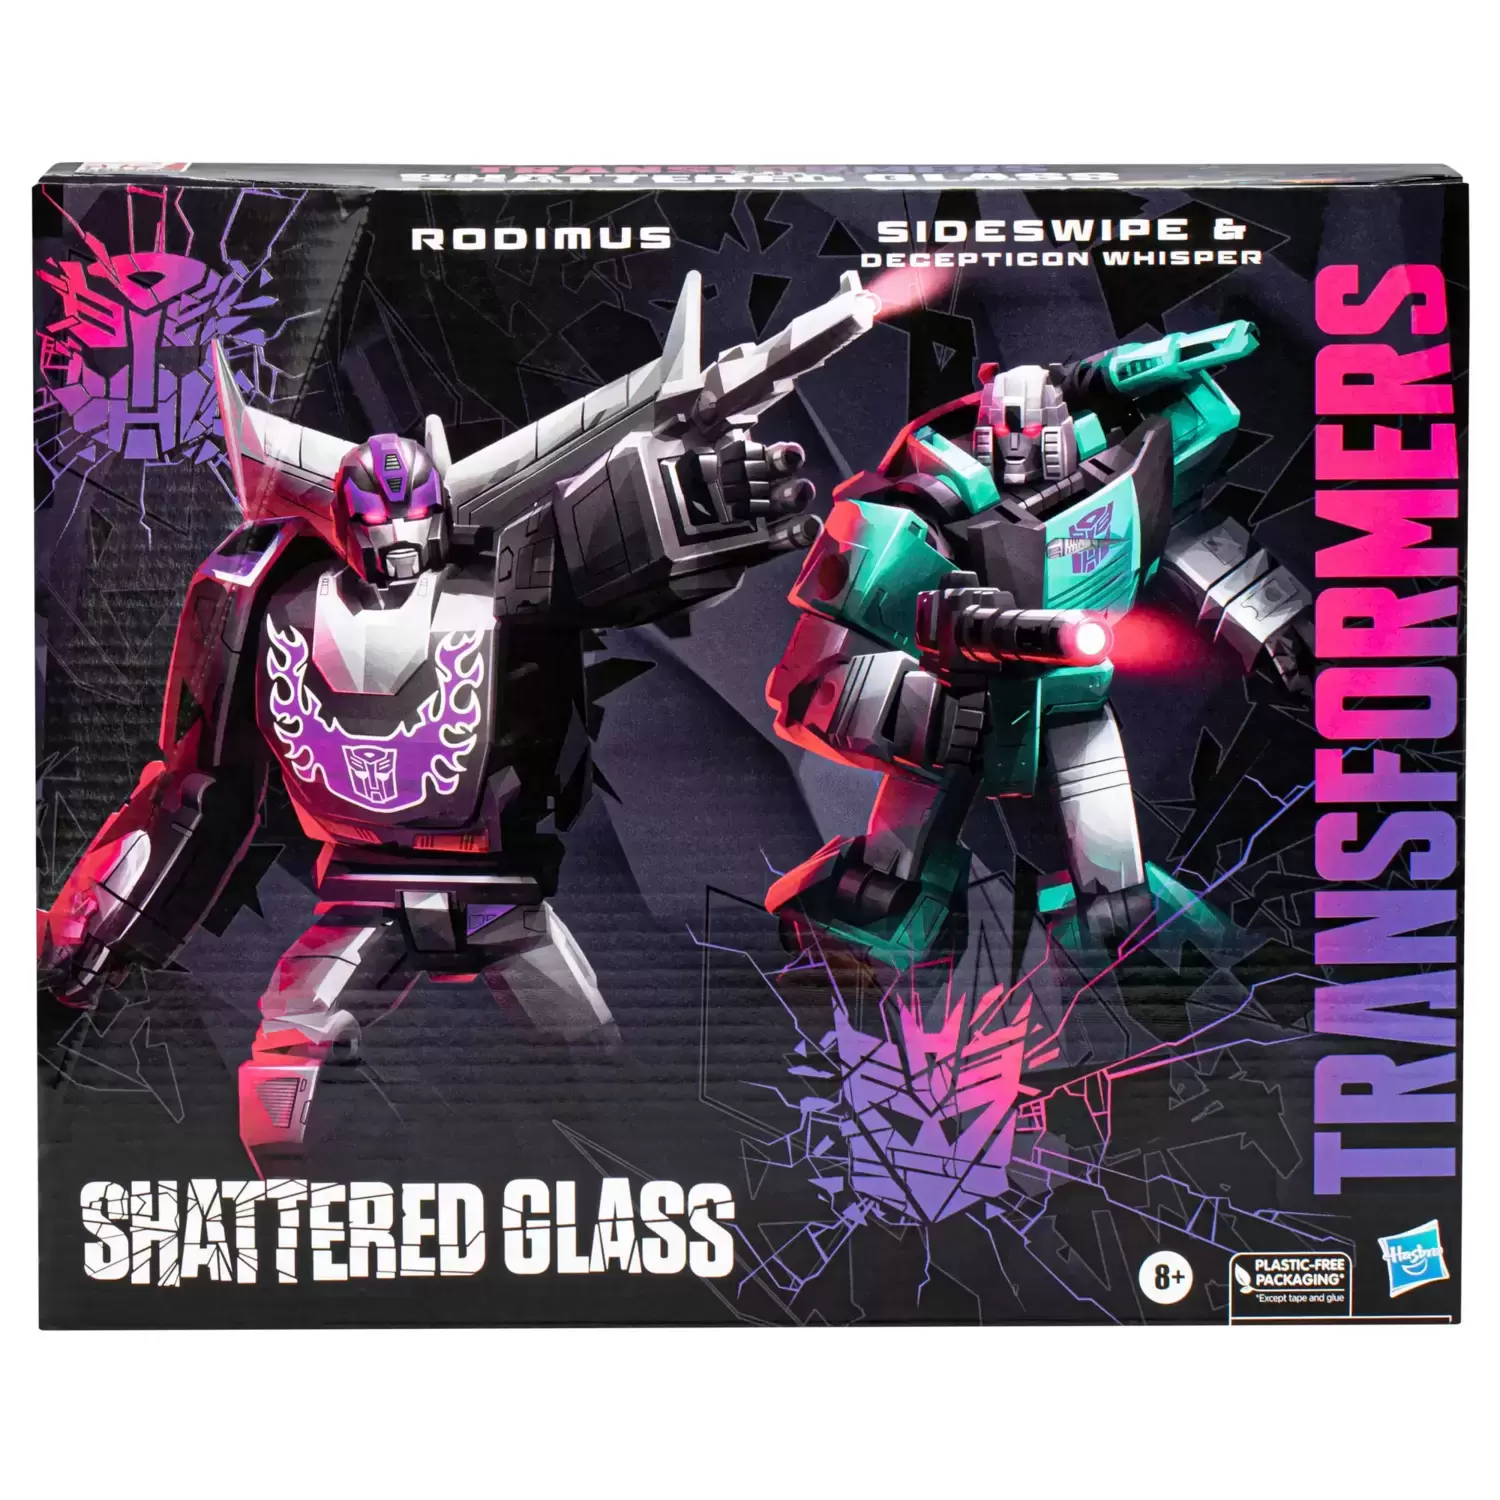 Shattered Glass Collection - Transformers Generations - Rodimus vs Sideswipe With Whisper